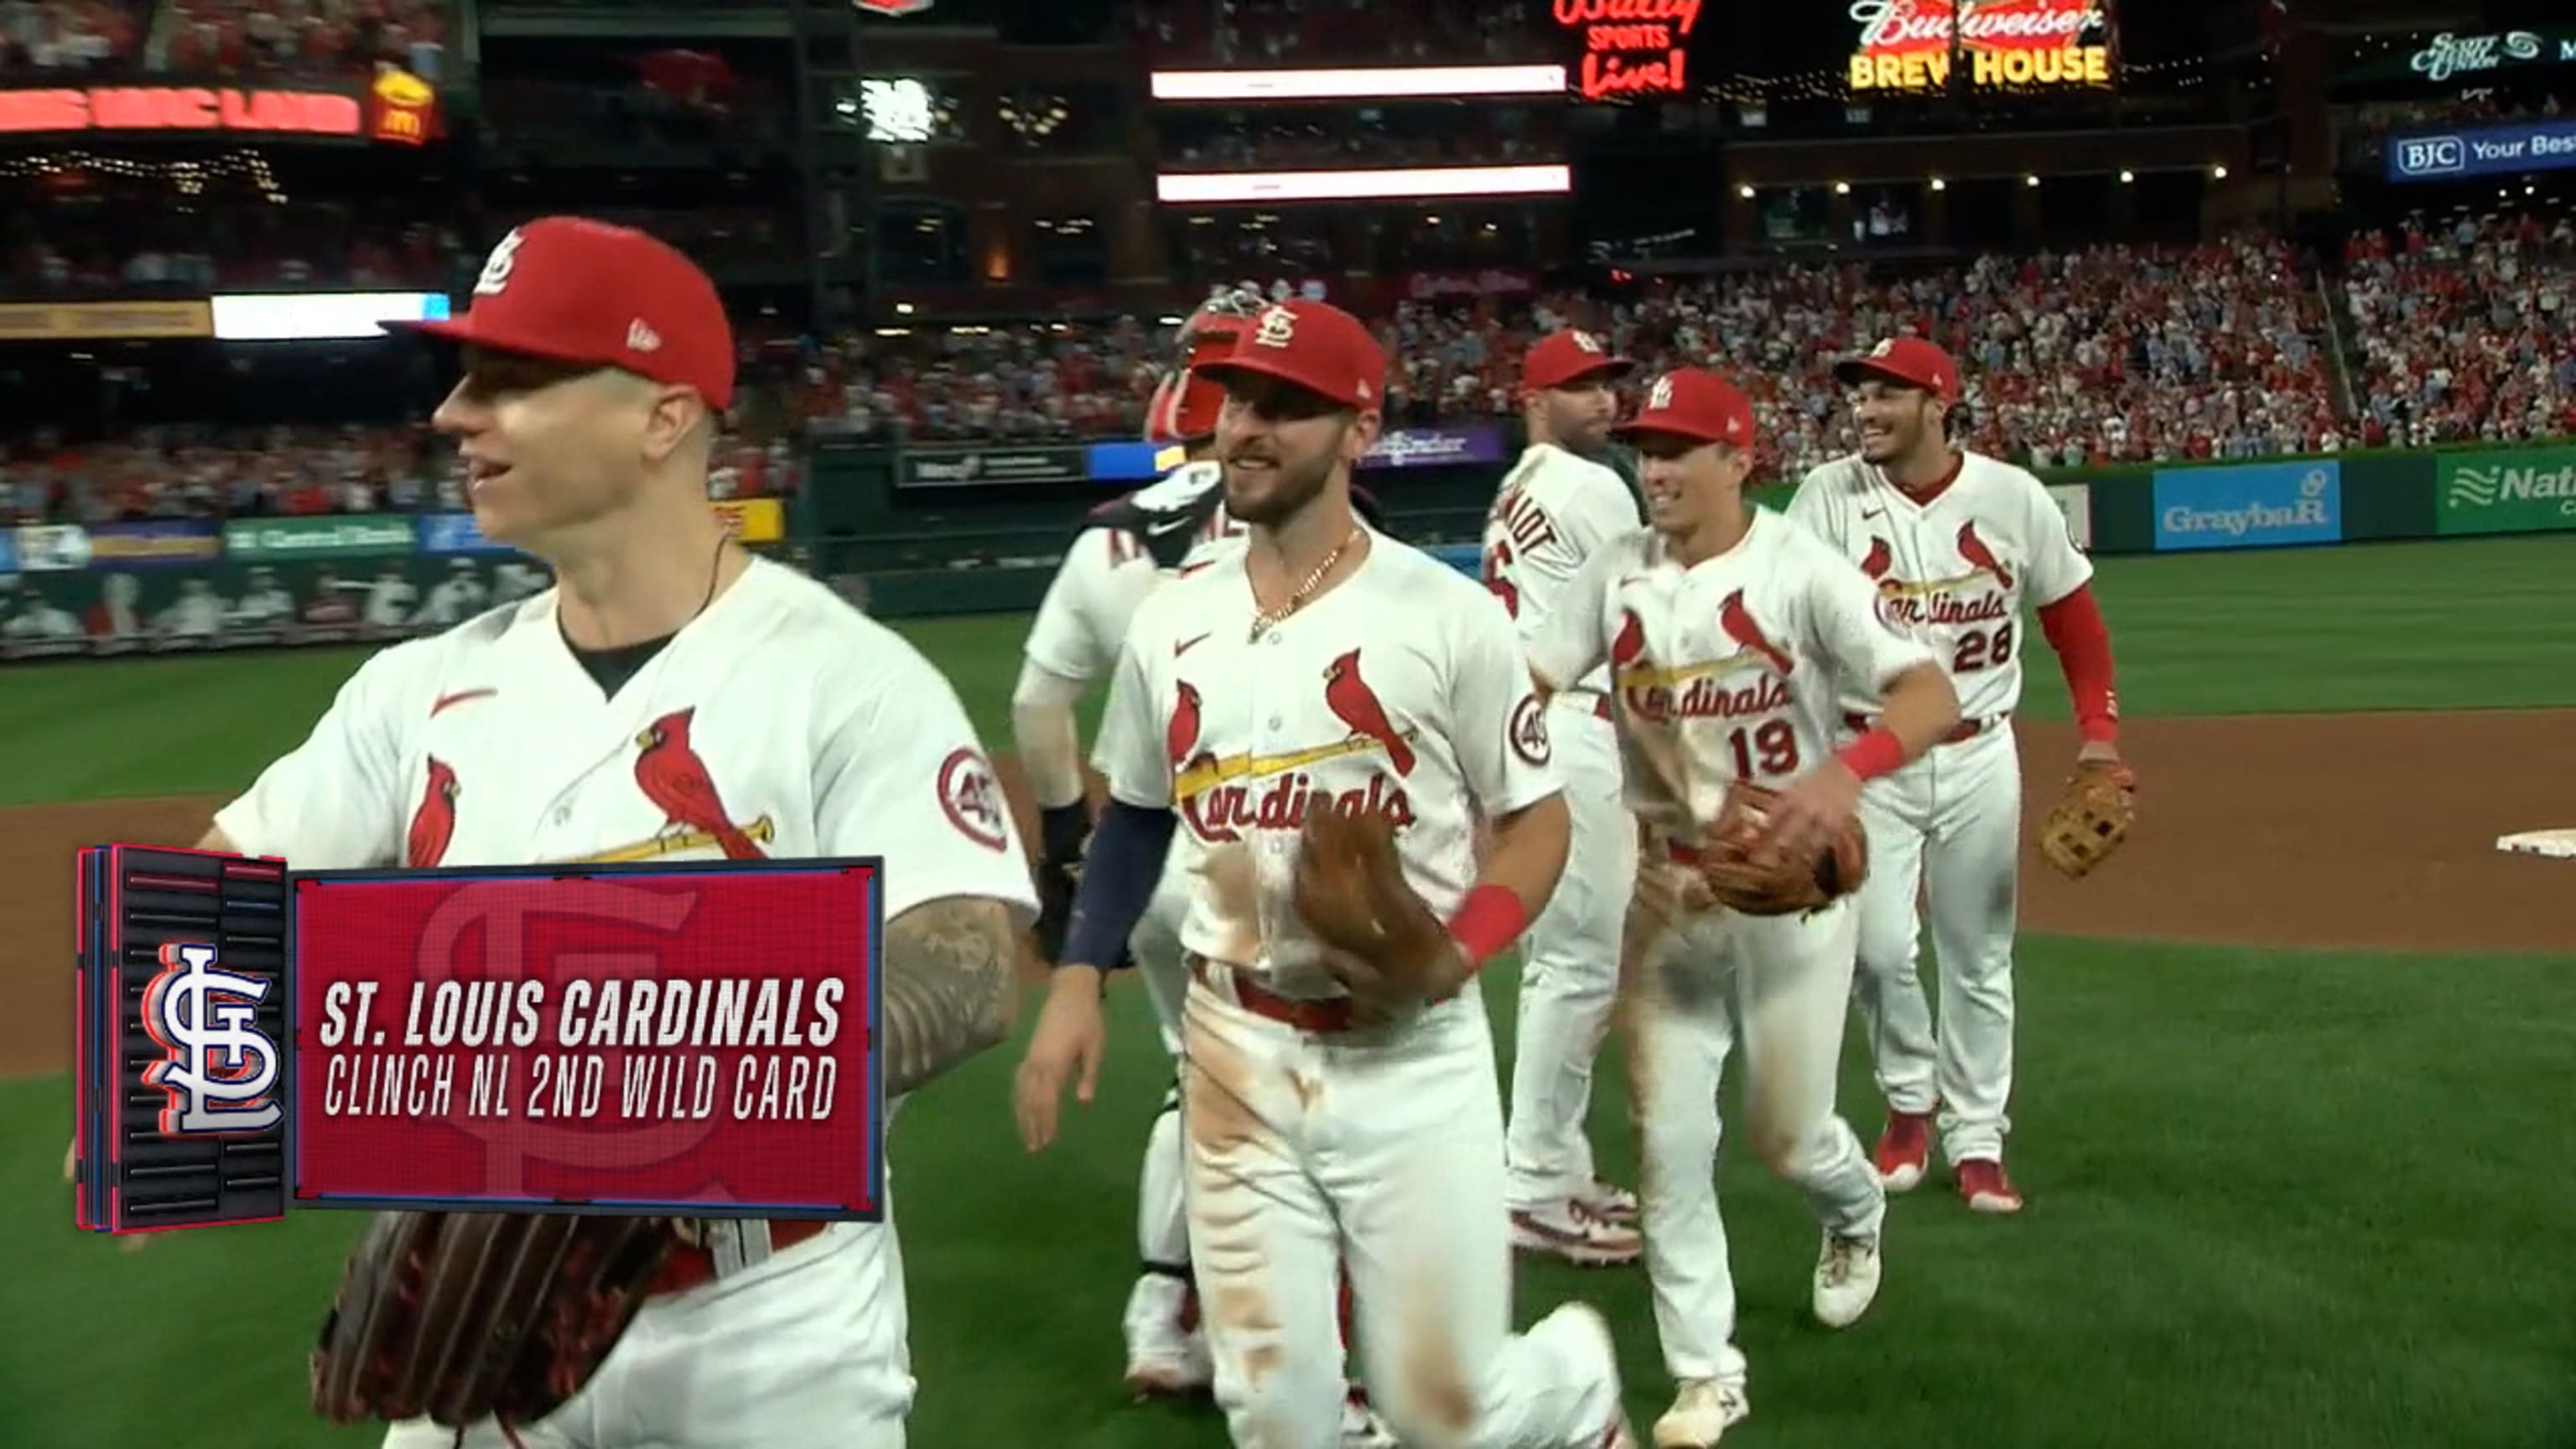 Cardinals set new franchise record with 15th straight win